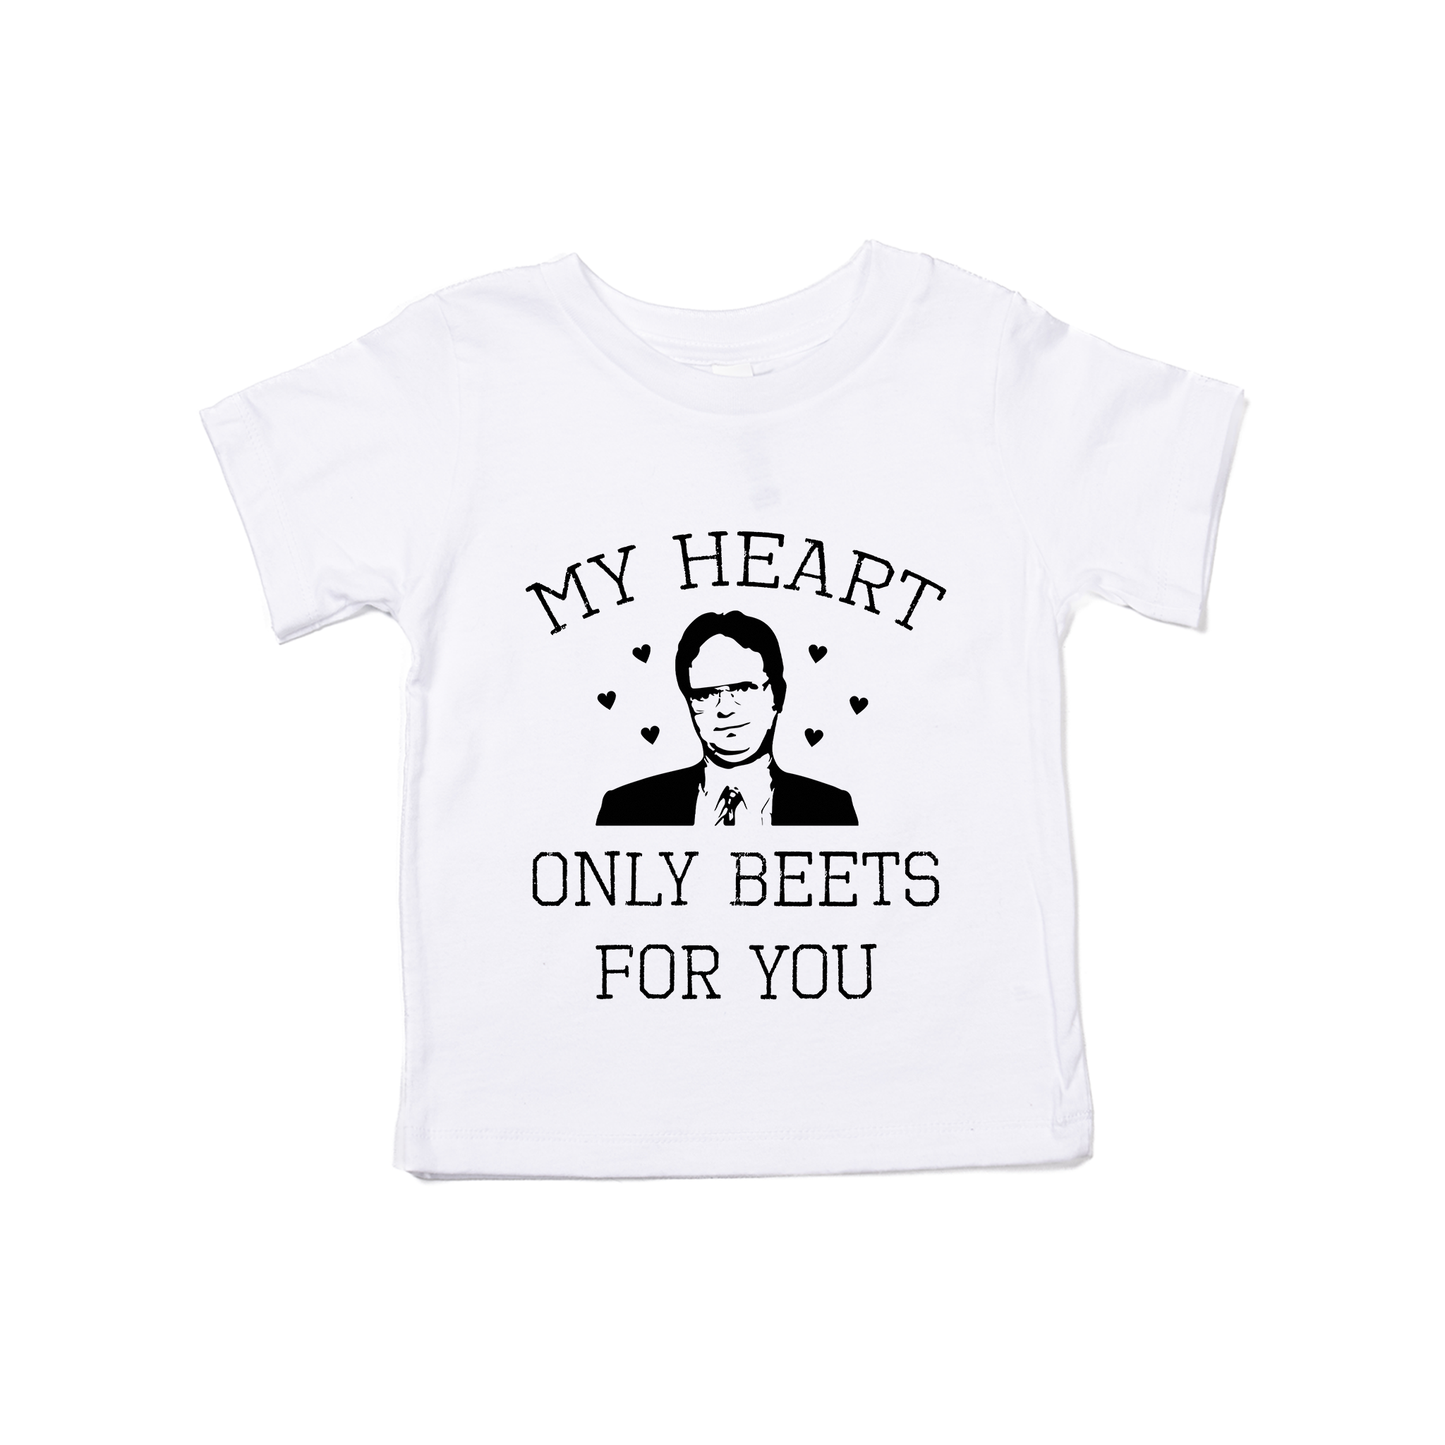 My Heart Only Beets For You - Kids Tee (White)